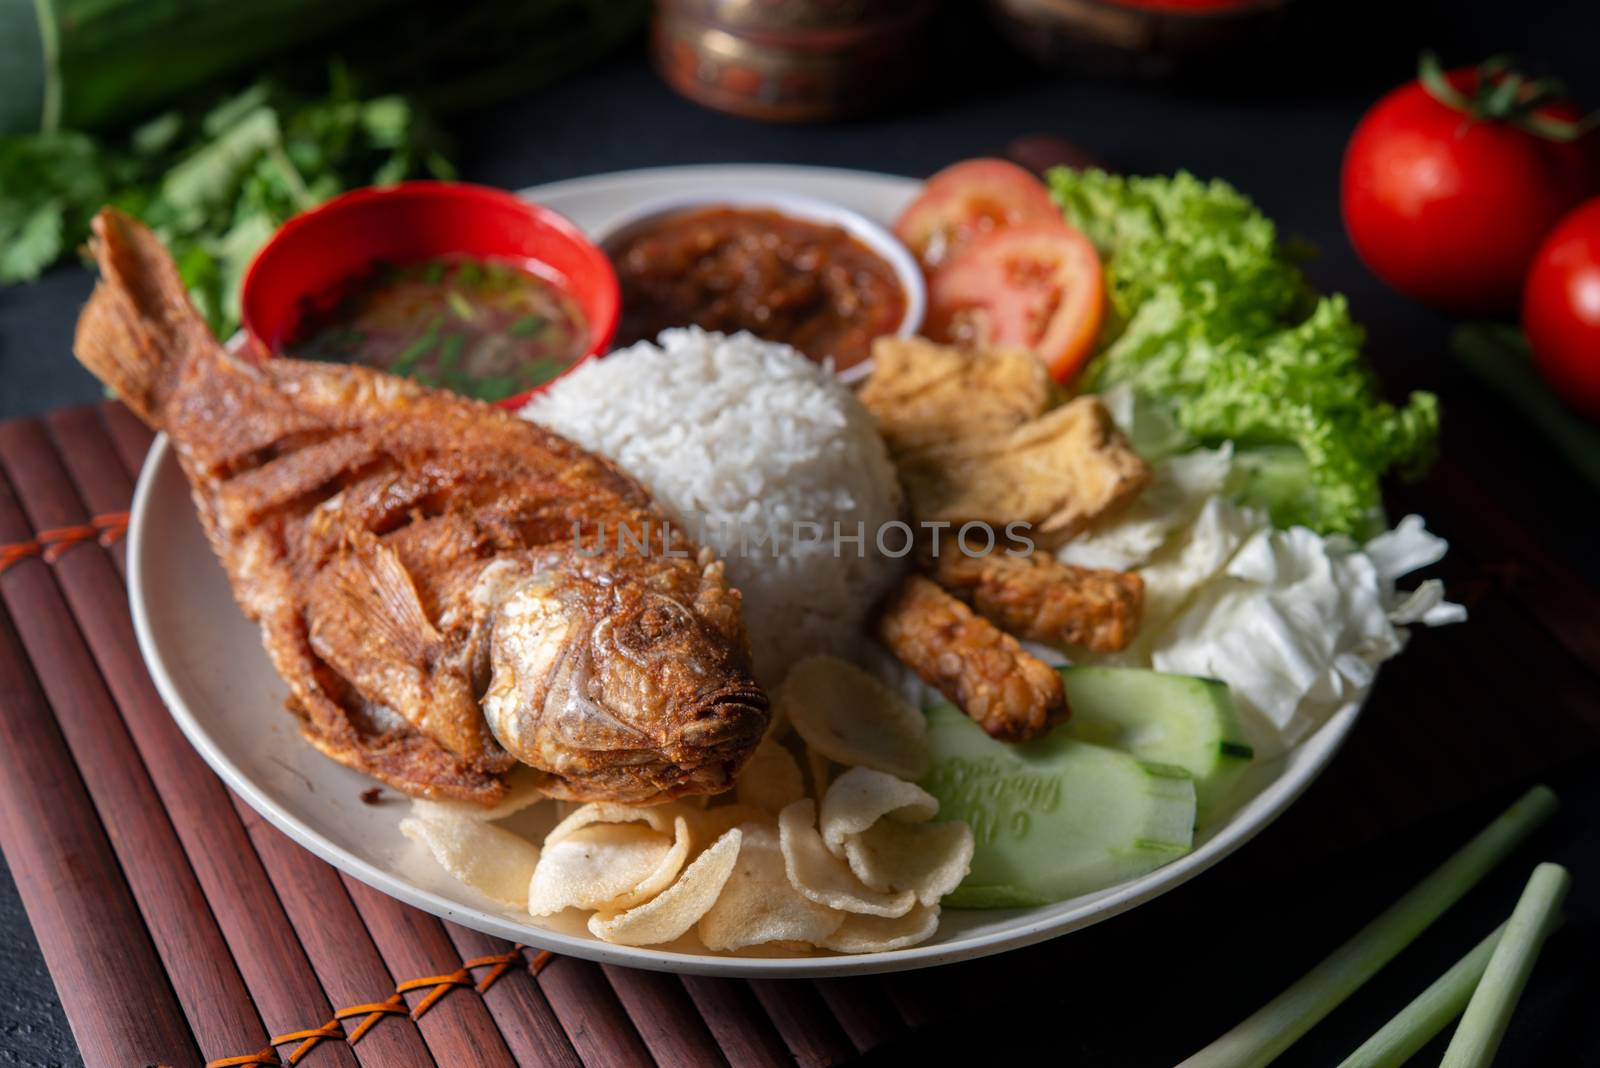 Fried tilapia fish and rice, popular traditional Malay or Indonesian local food.